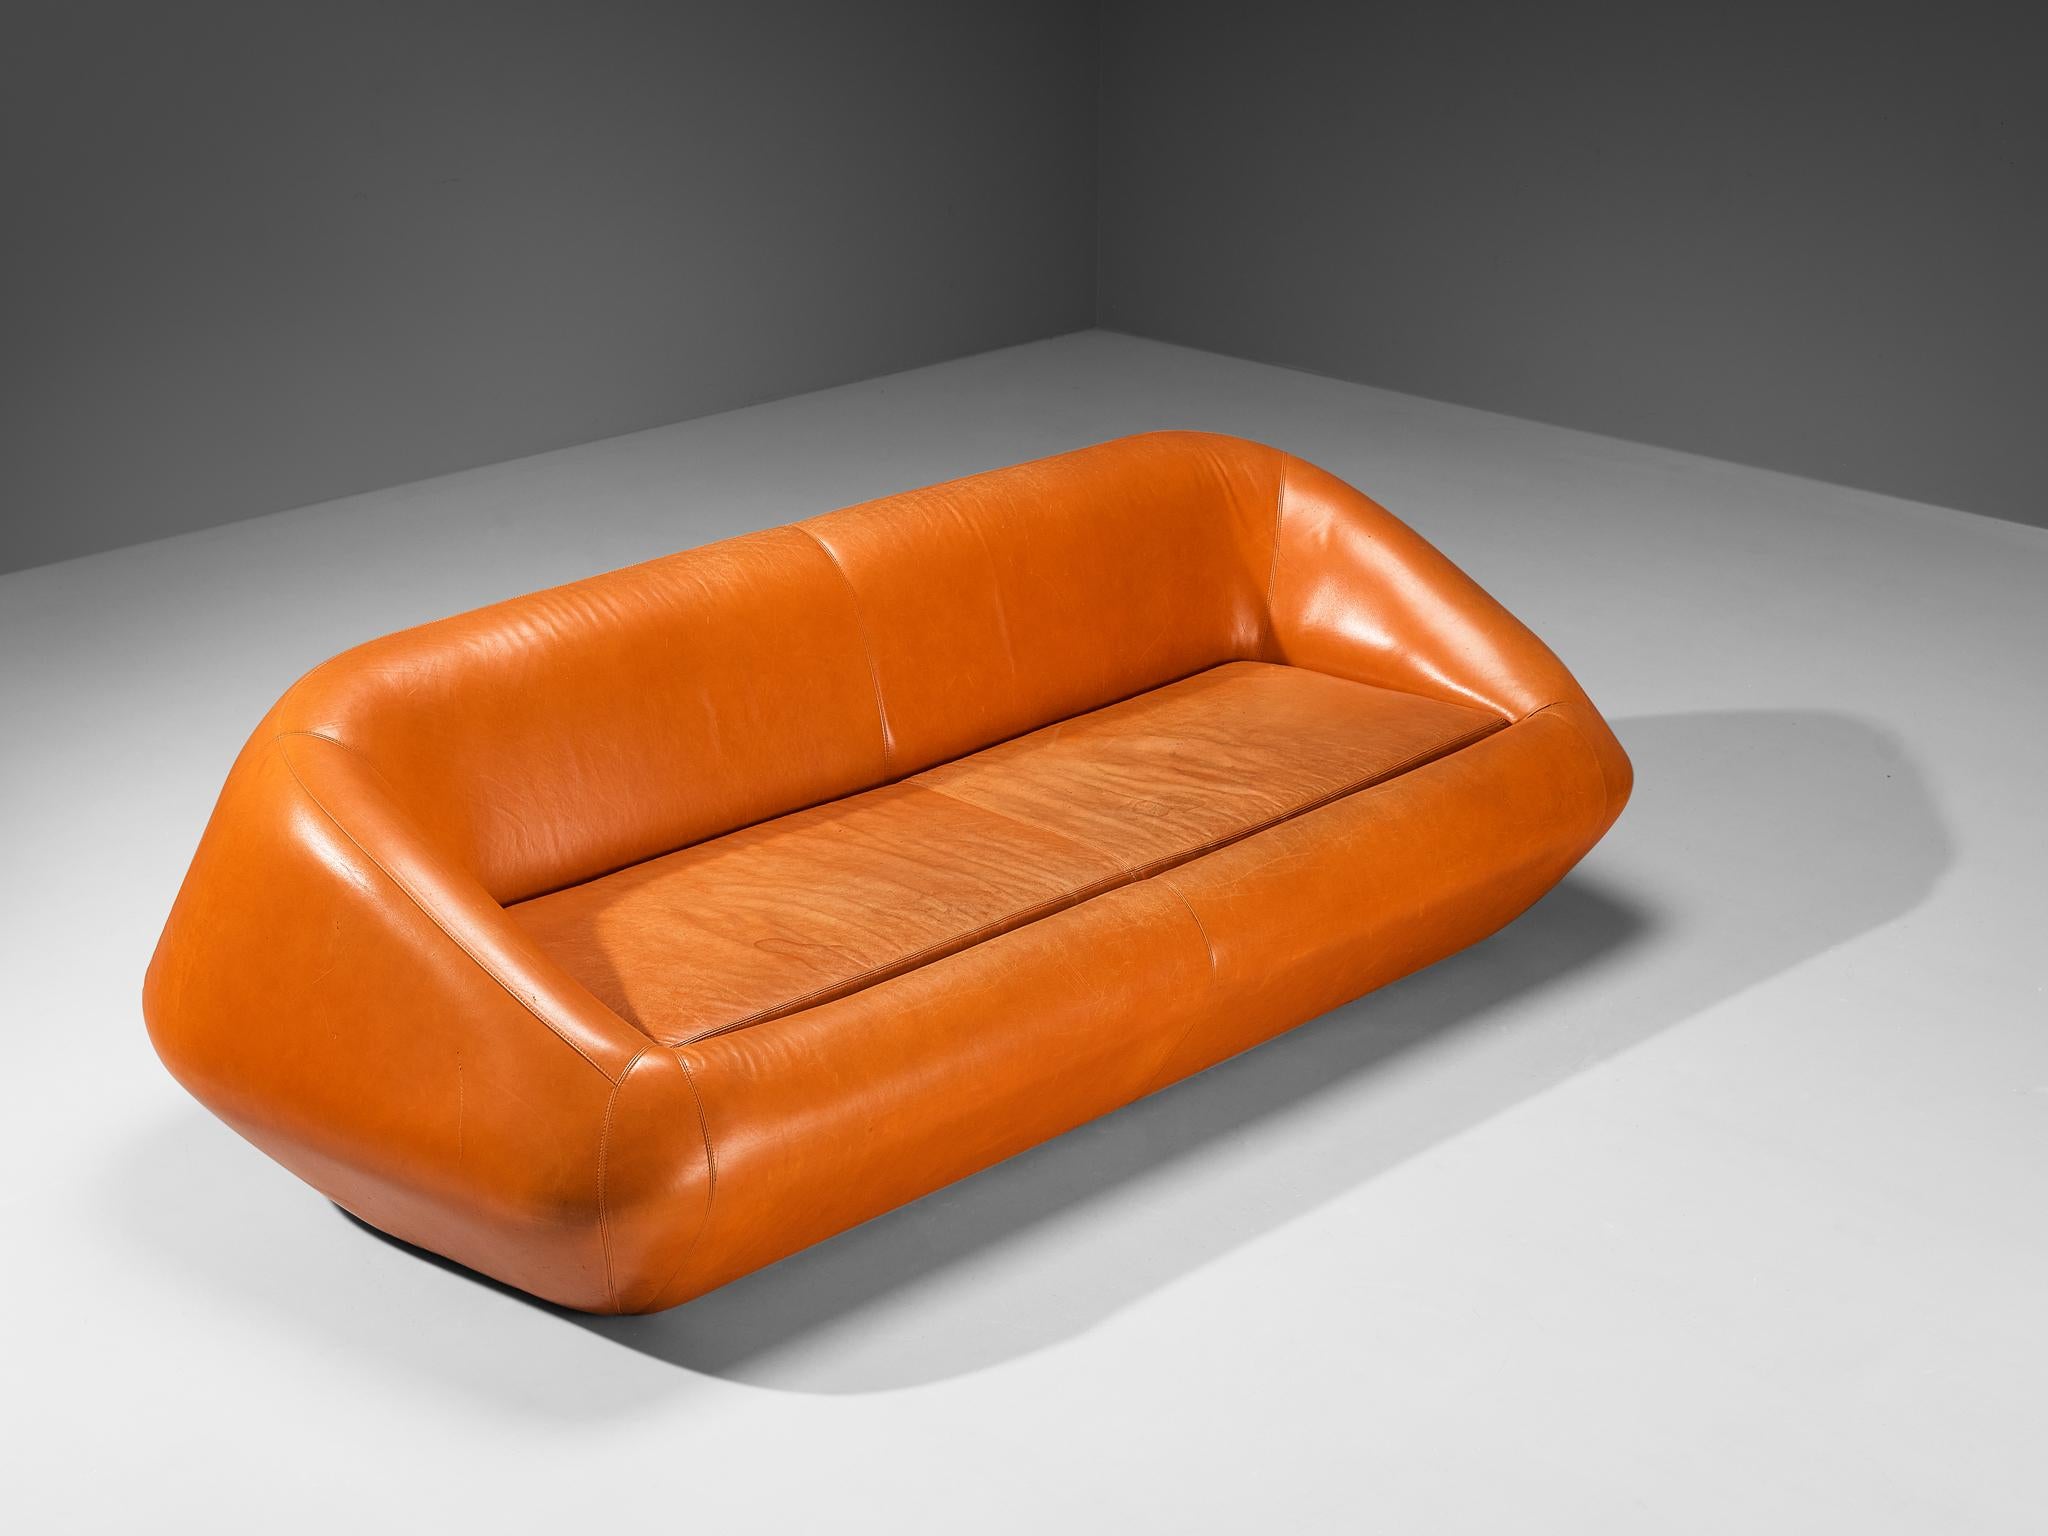 Three seat sofa, leather, Europe, 1970s
Exiting sofa design with strong Space Age characteristics. This sofa was made in Europe in the 1970s and clearly expresses the post-modern traits of that period in furniture design. Design in the seventies was